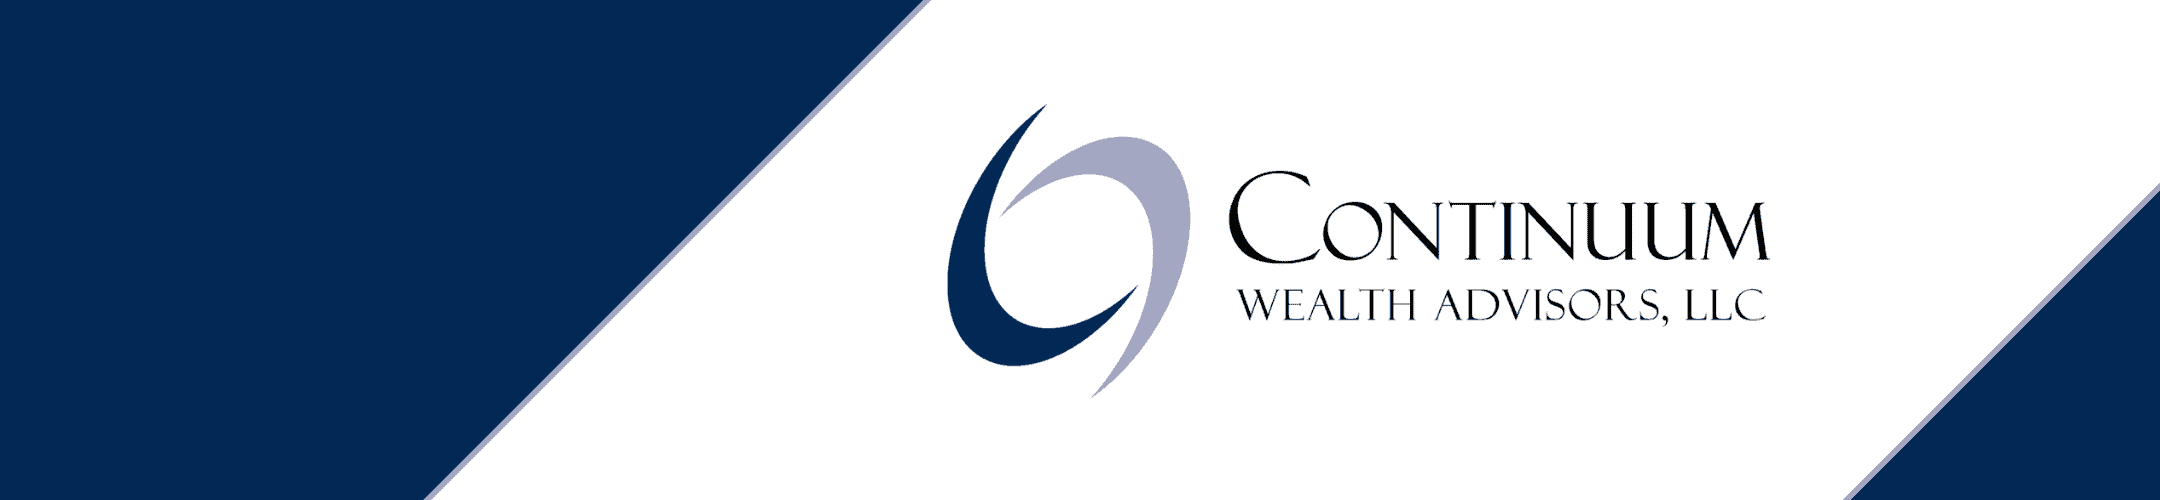 Elegant and professional graphic featuring the logo of continuum wealth advisors, llc, split by a sleek, diagonal line that contrasts a dark blue background on one side with a light neutral background on the other.